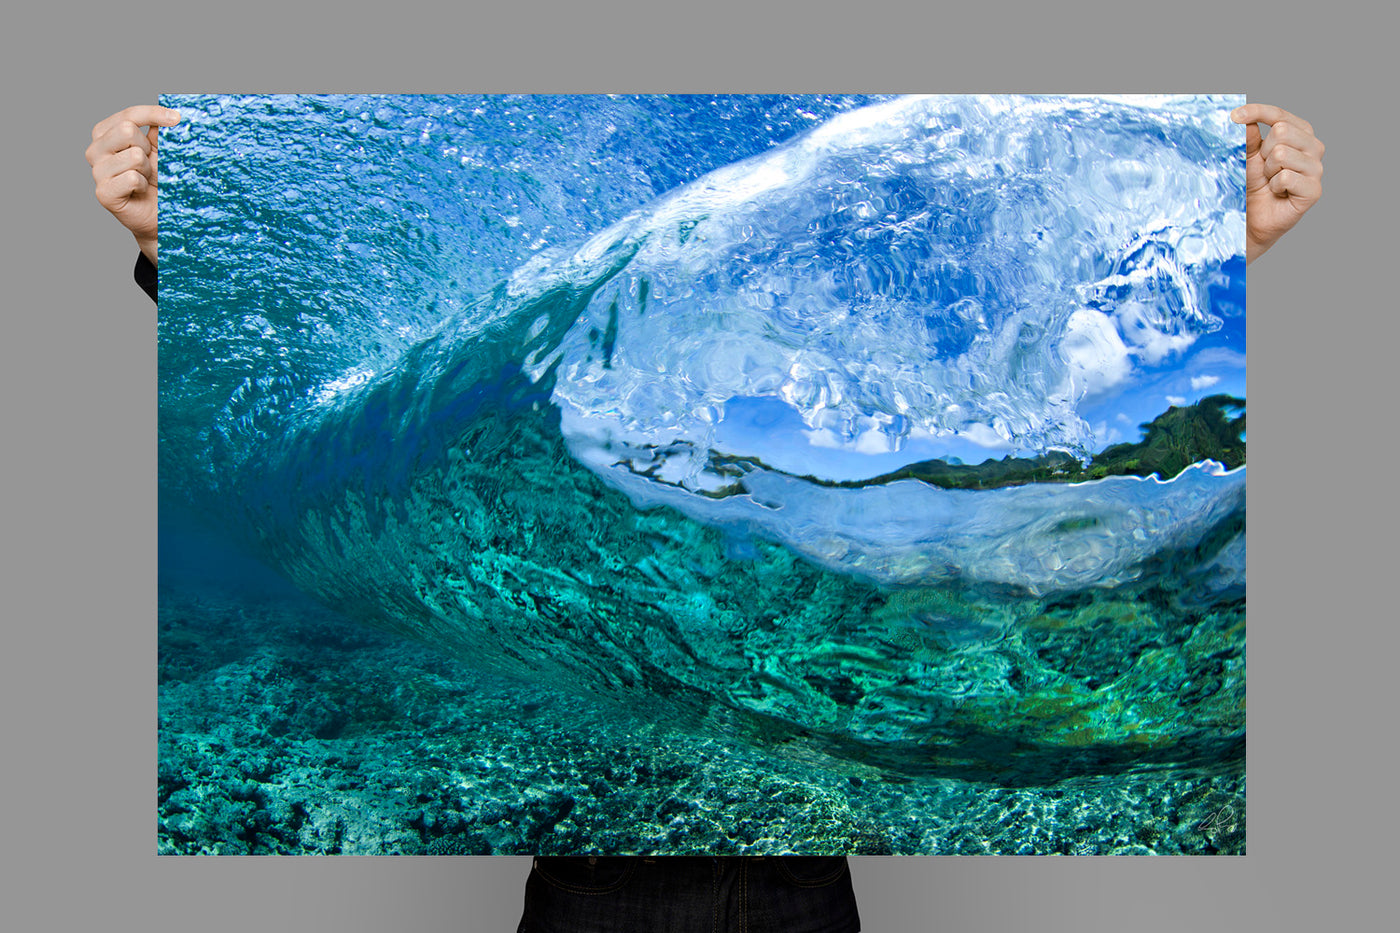 Stunning Ocean Photographic Prints and Frames | Craig Parry Photography